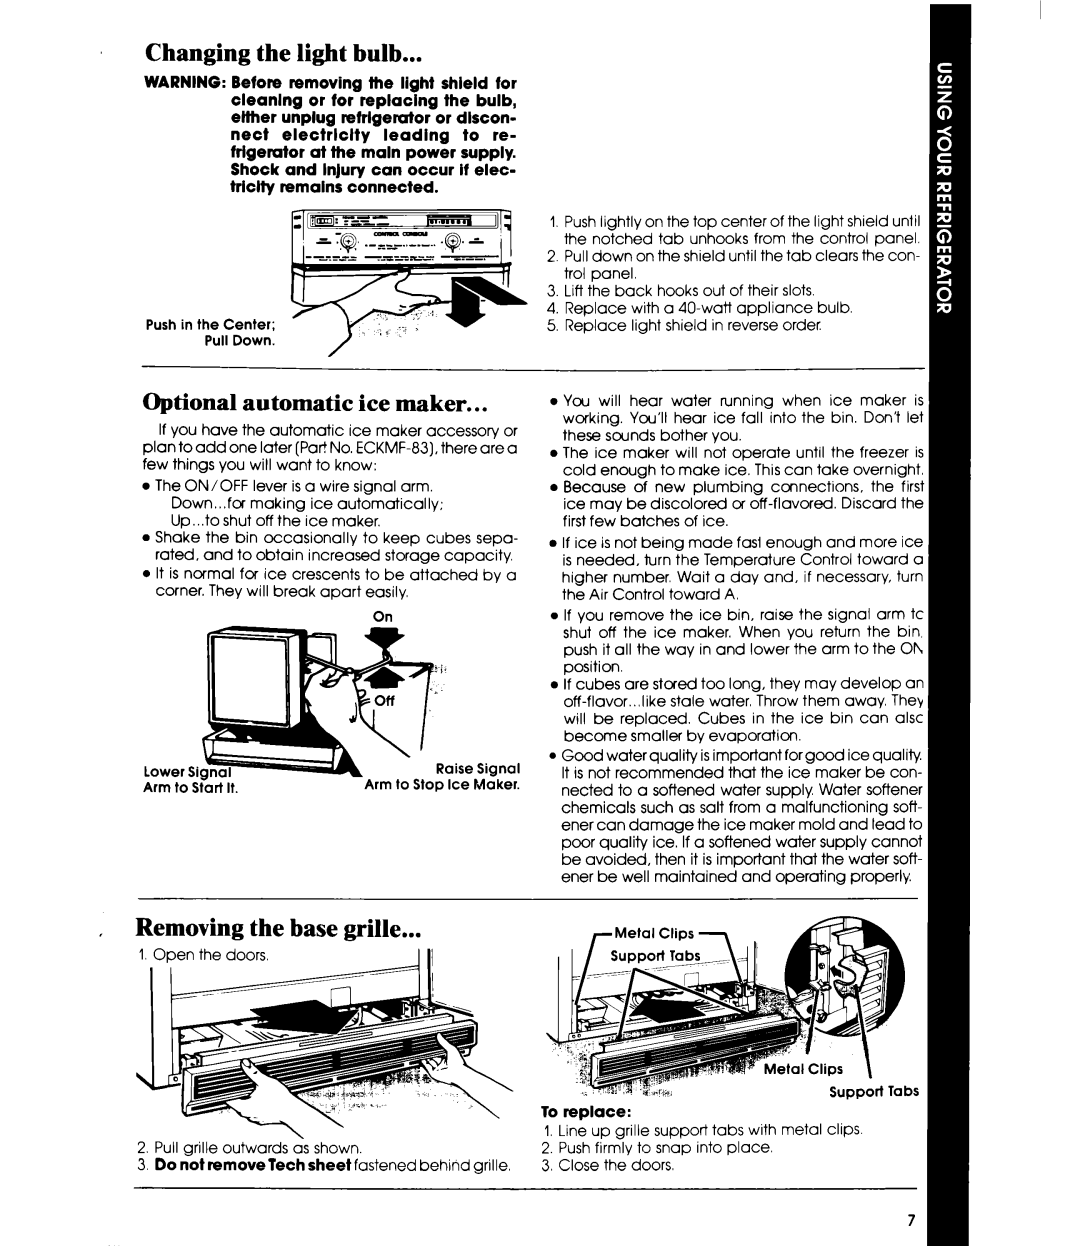 Whirlpool ETl4EP manual Changing the light bulb, Optional automatic ice maker, Removing the base grille 